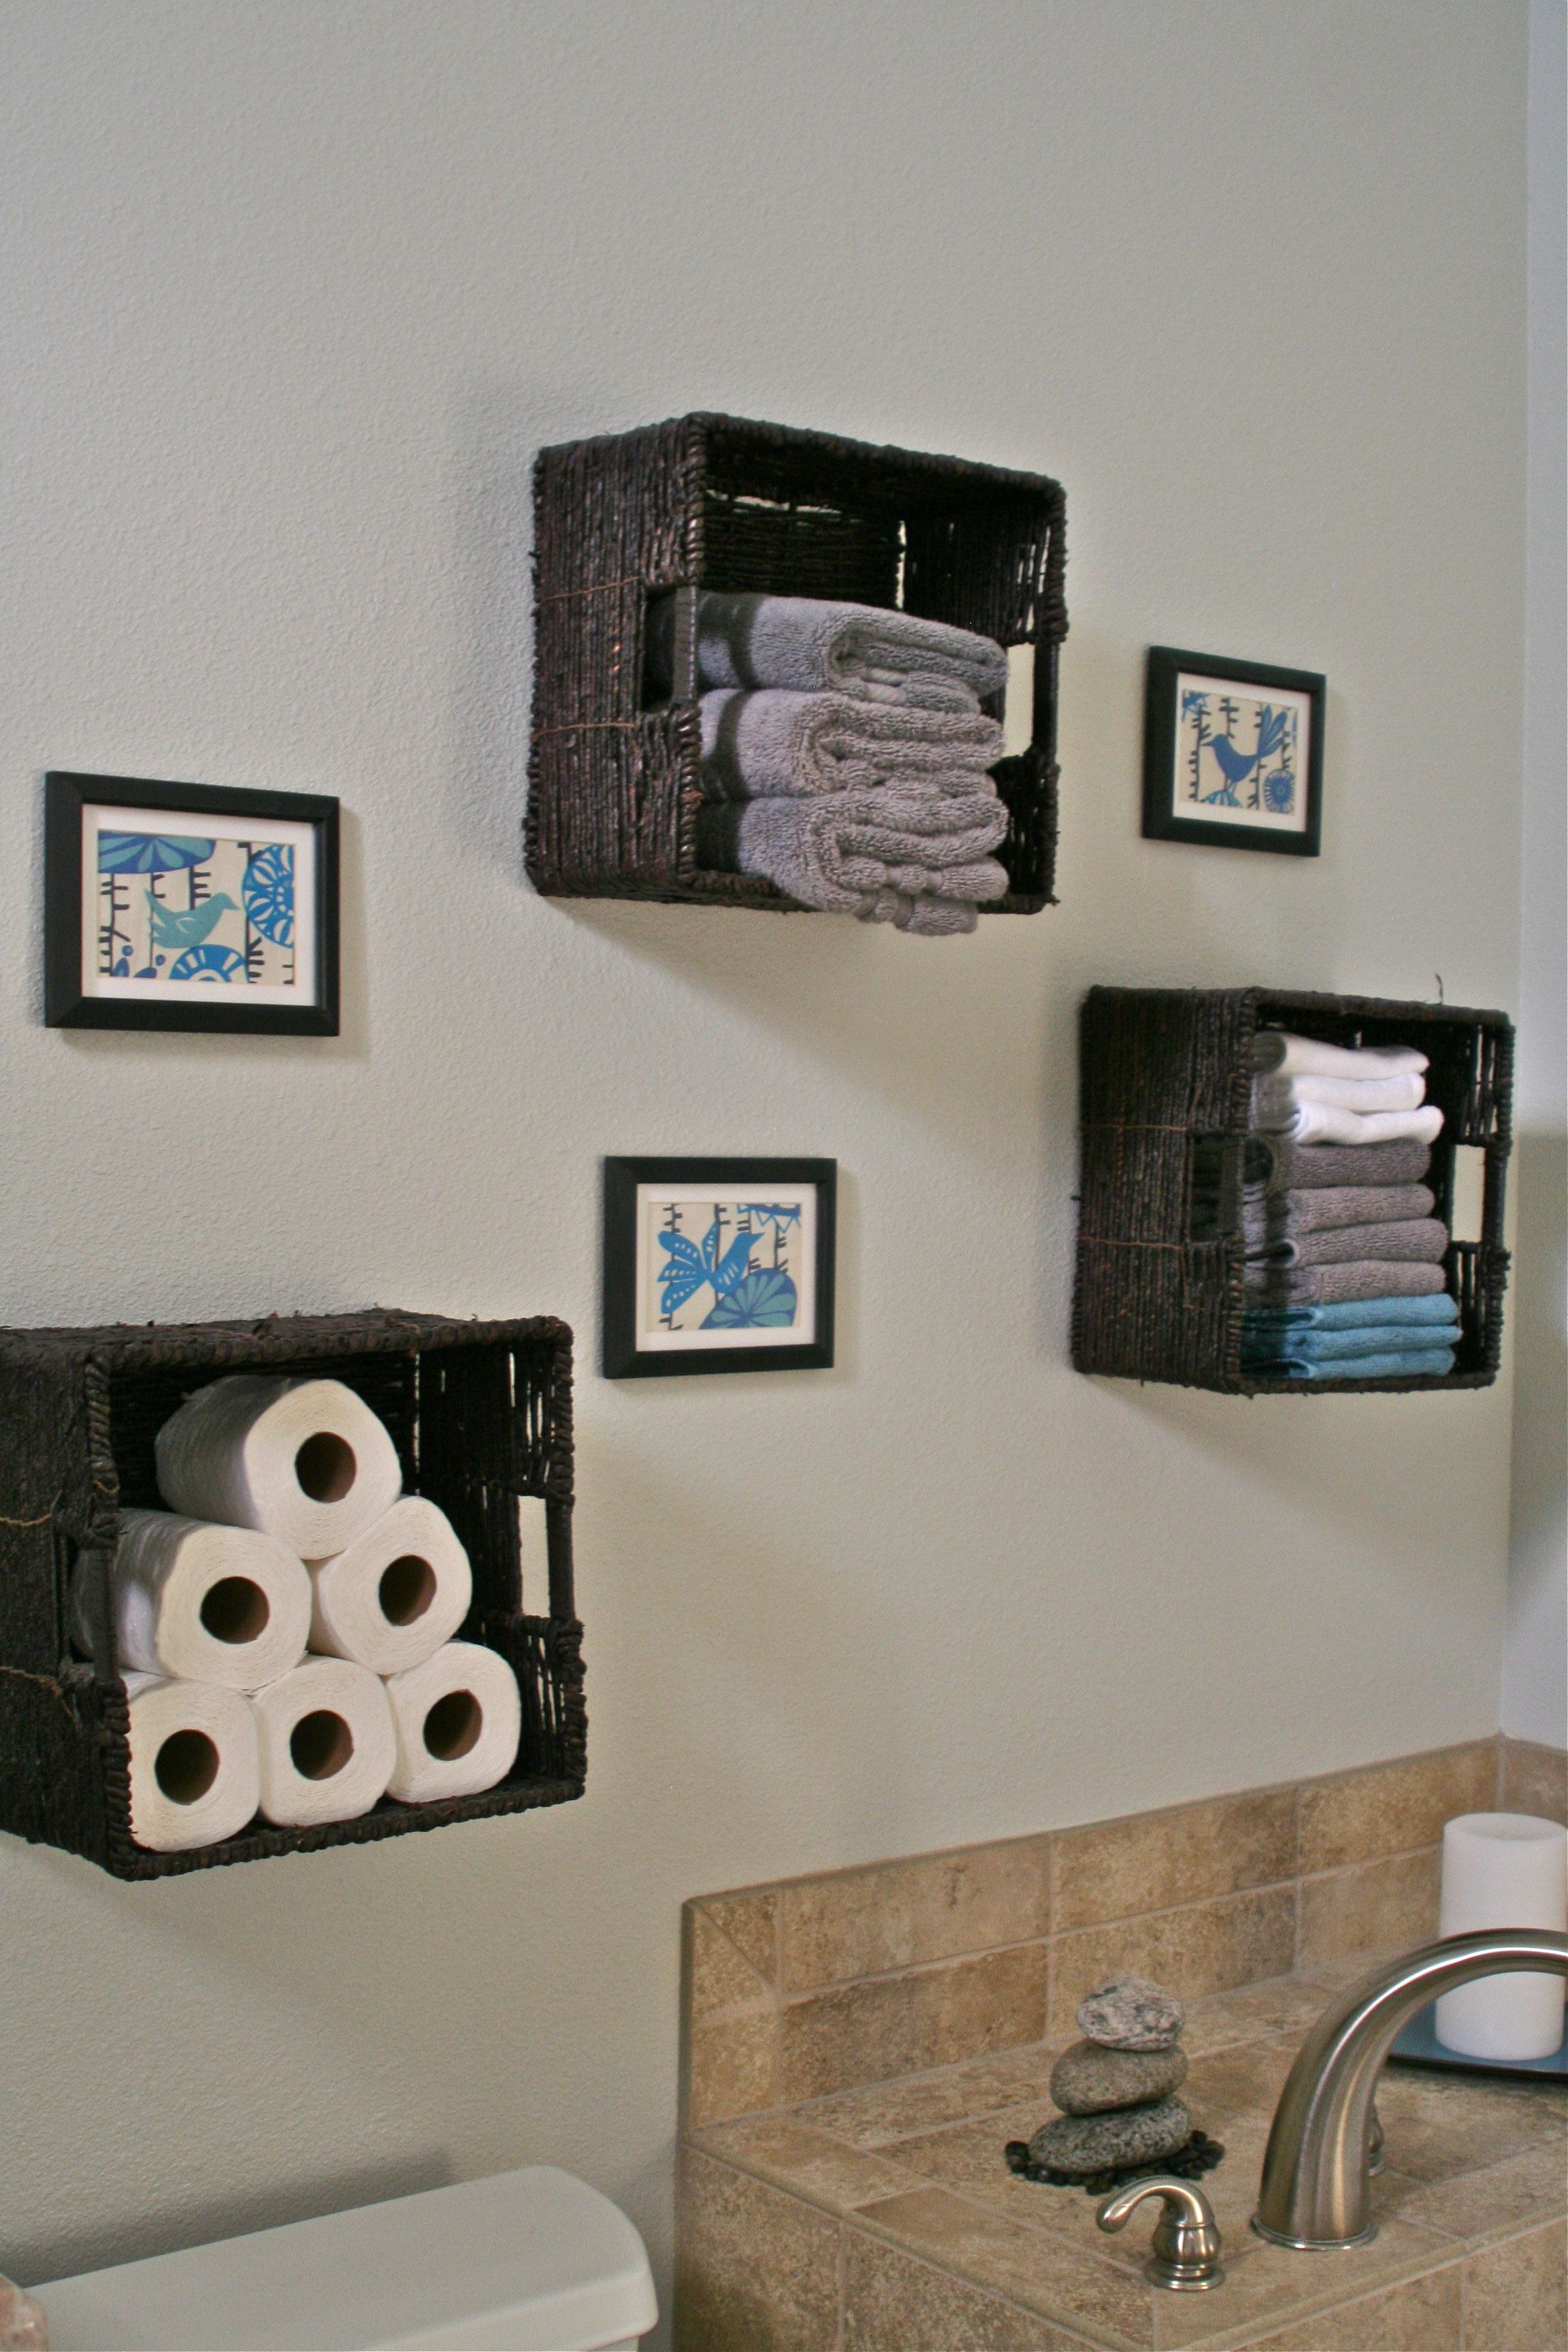 Bathroom Storage Baskets For Towels Toilet Paper Etc Love pertaining to proportions 2304 X 3456